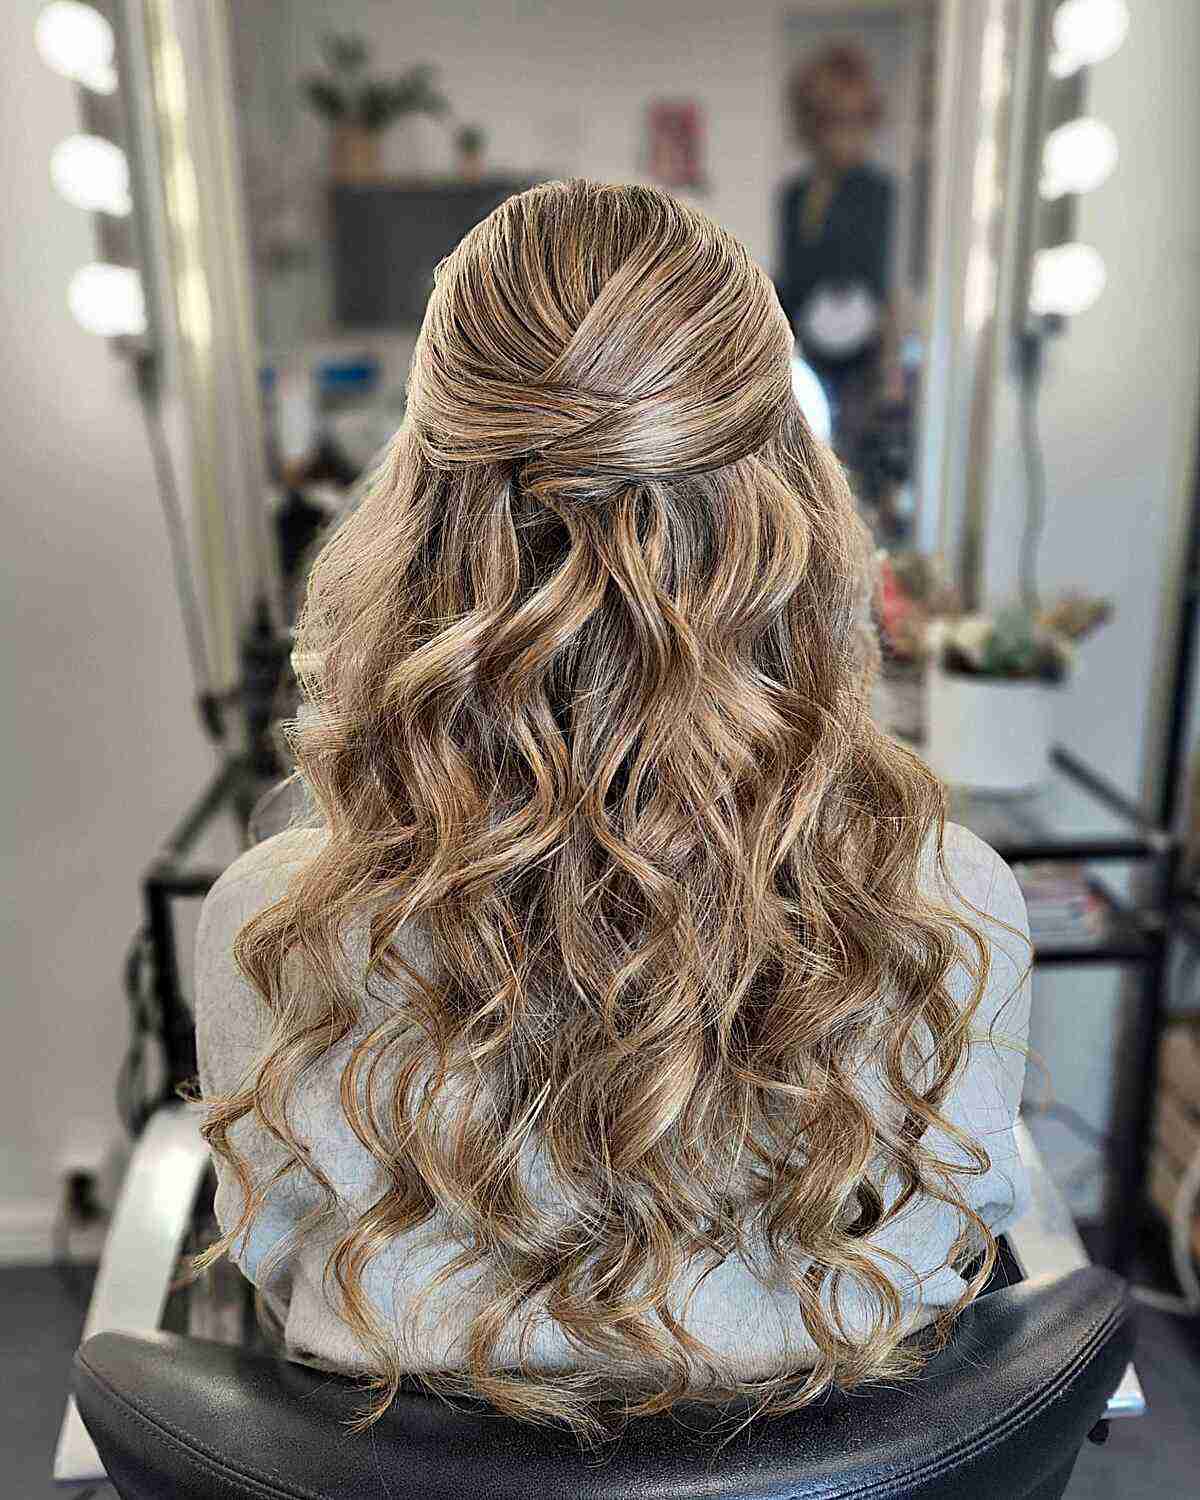 Easy Overlap Half-Updo with Long Soft Curls for Prom Night